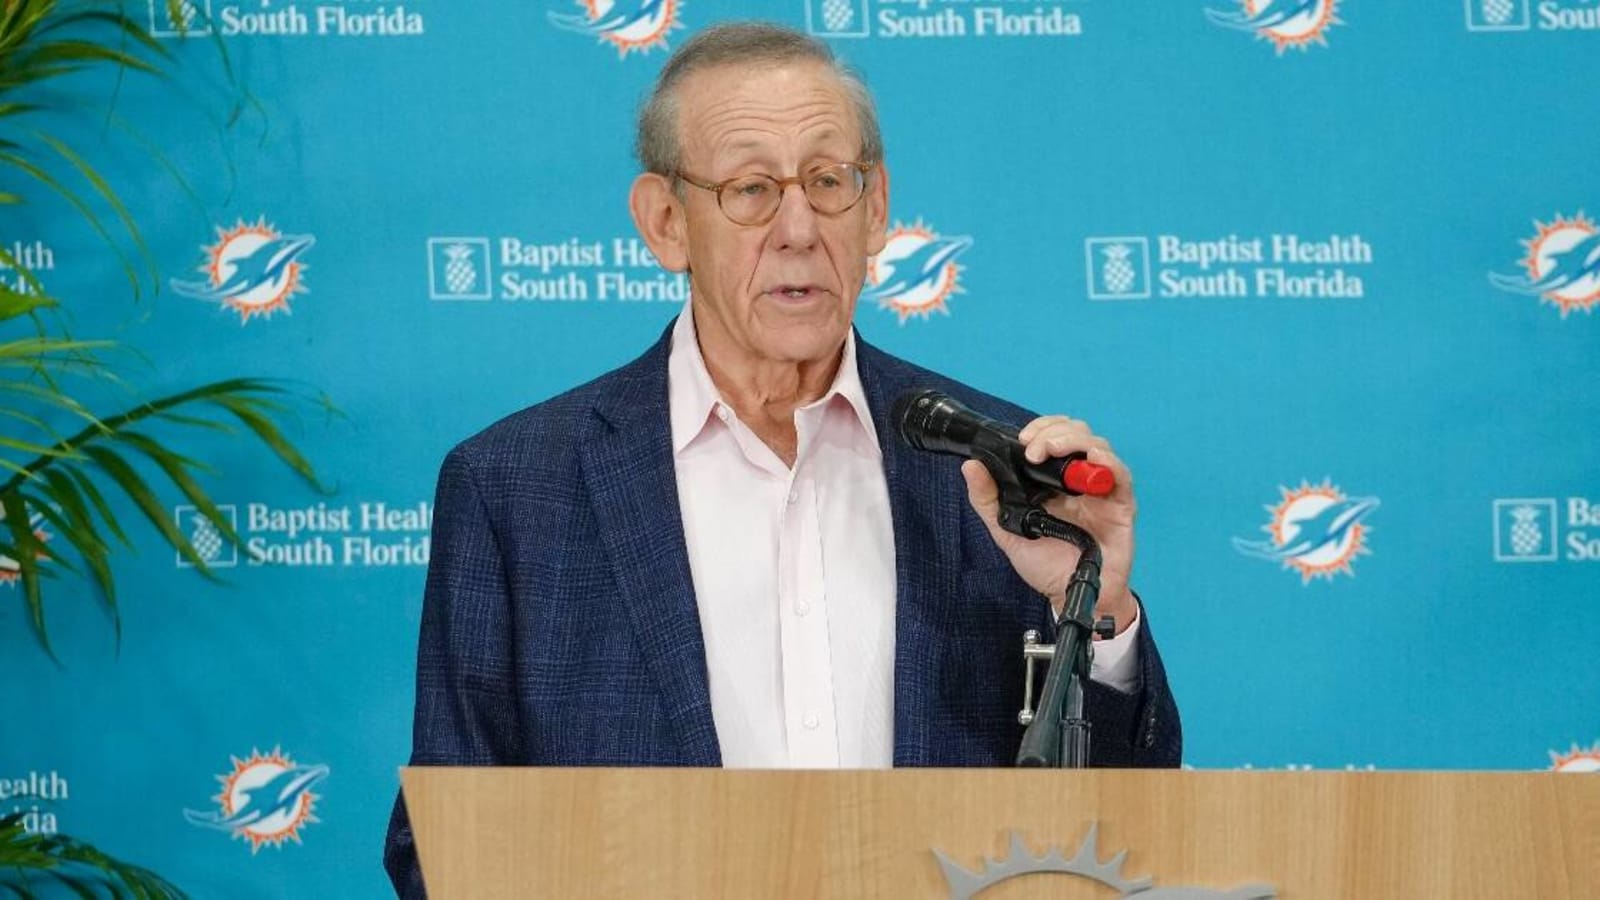 Report: Dolphins owner Stephen Ross rejects $10 billion offer, team not for sale